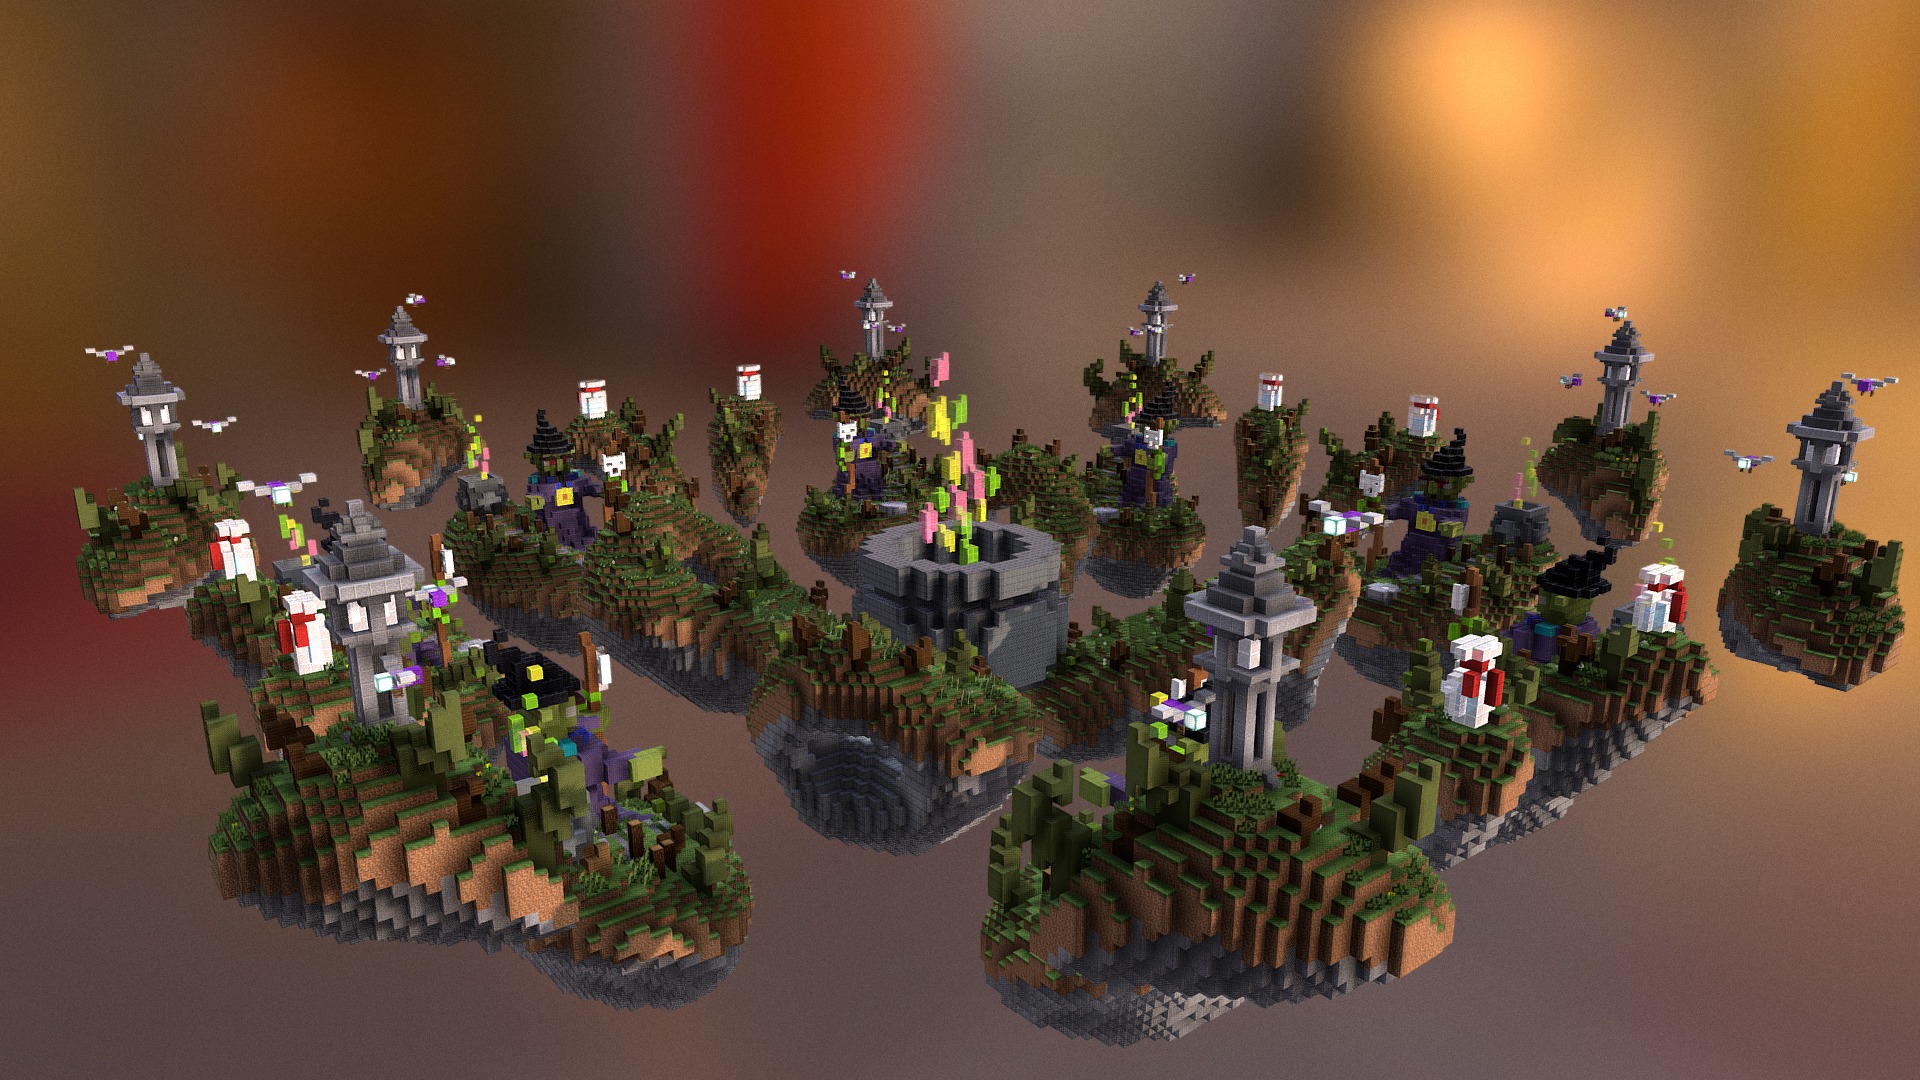 3D model WitchesTeam&SoloSkywars - This is a 3D model of the WitchesTeam&SoloSkywars. The 3D model is about a video game of a city.